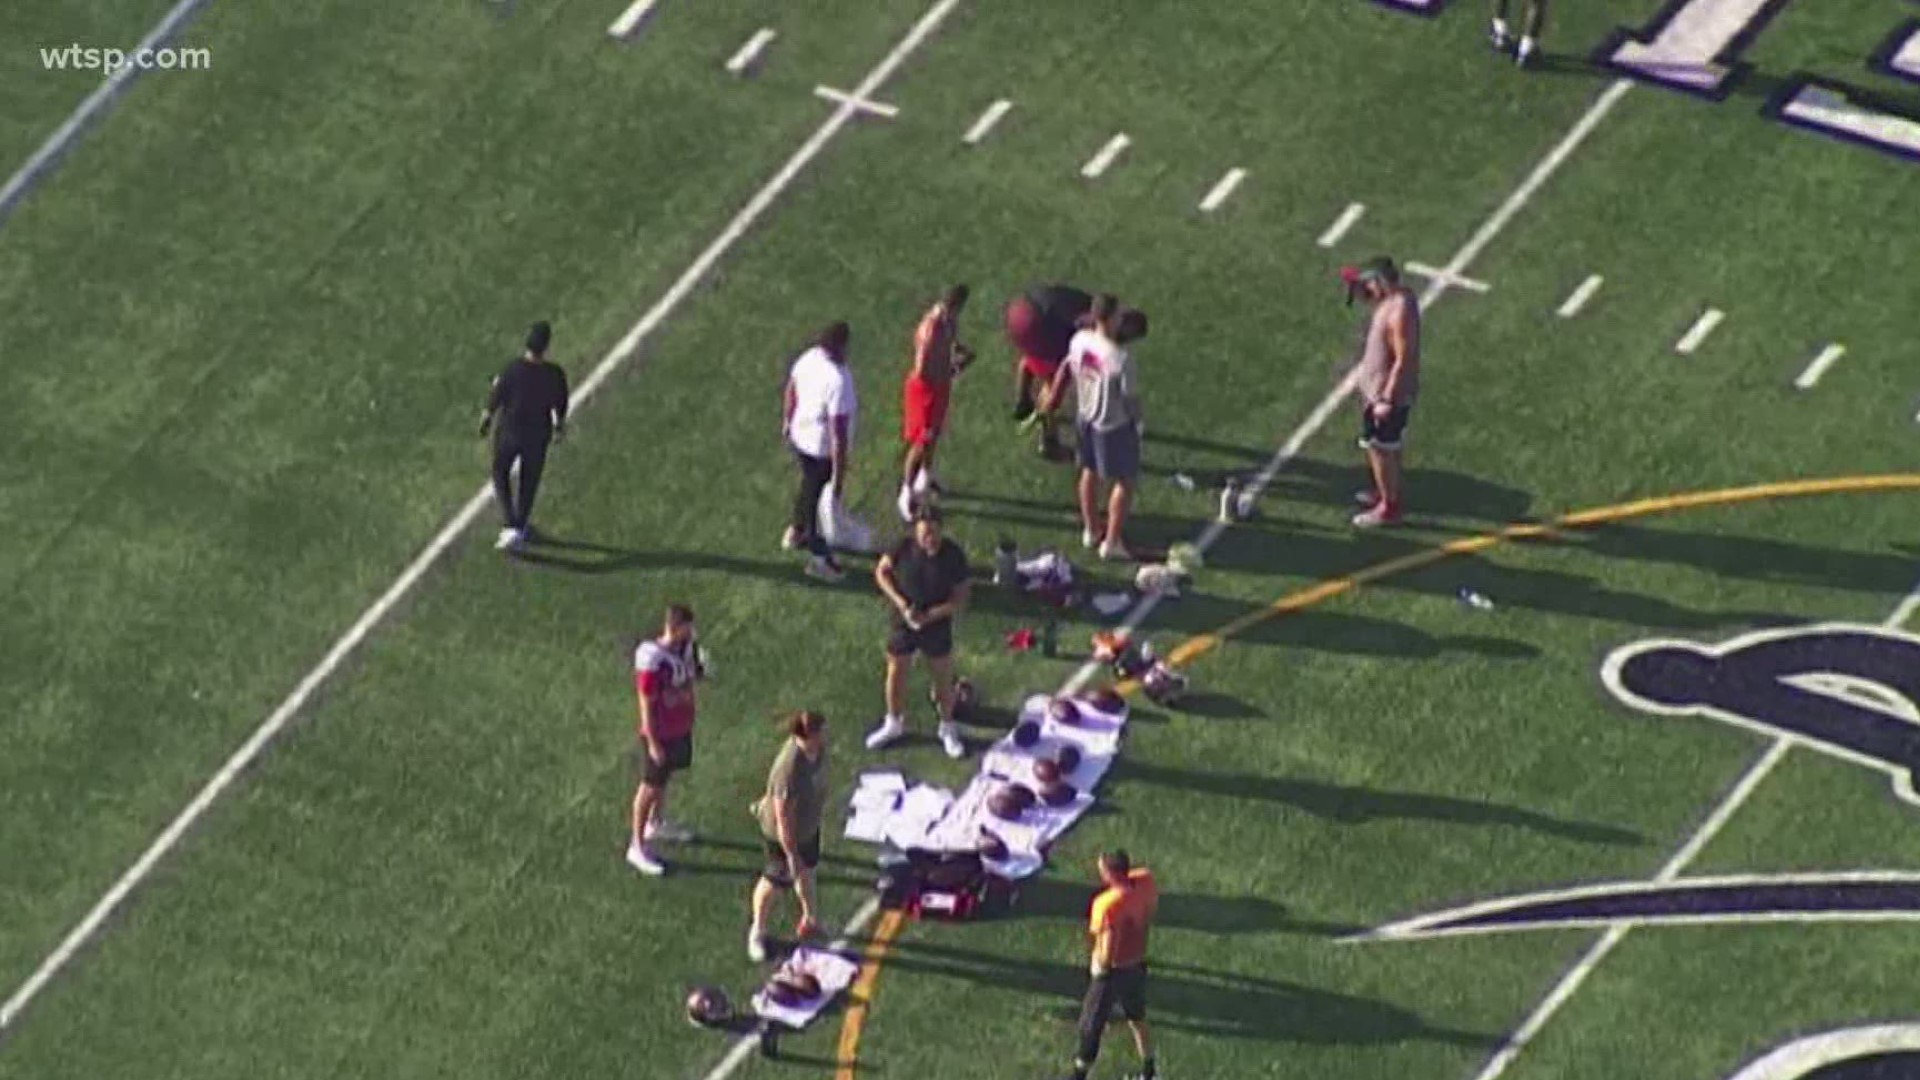 Sky 10 flew over Berkley Prep on Thursday while Tom Brady lead an unofficial team workout.